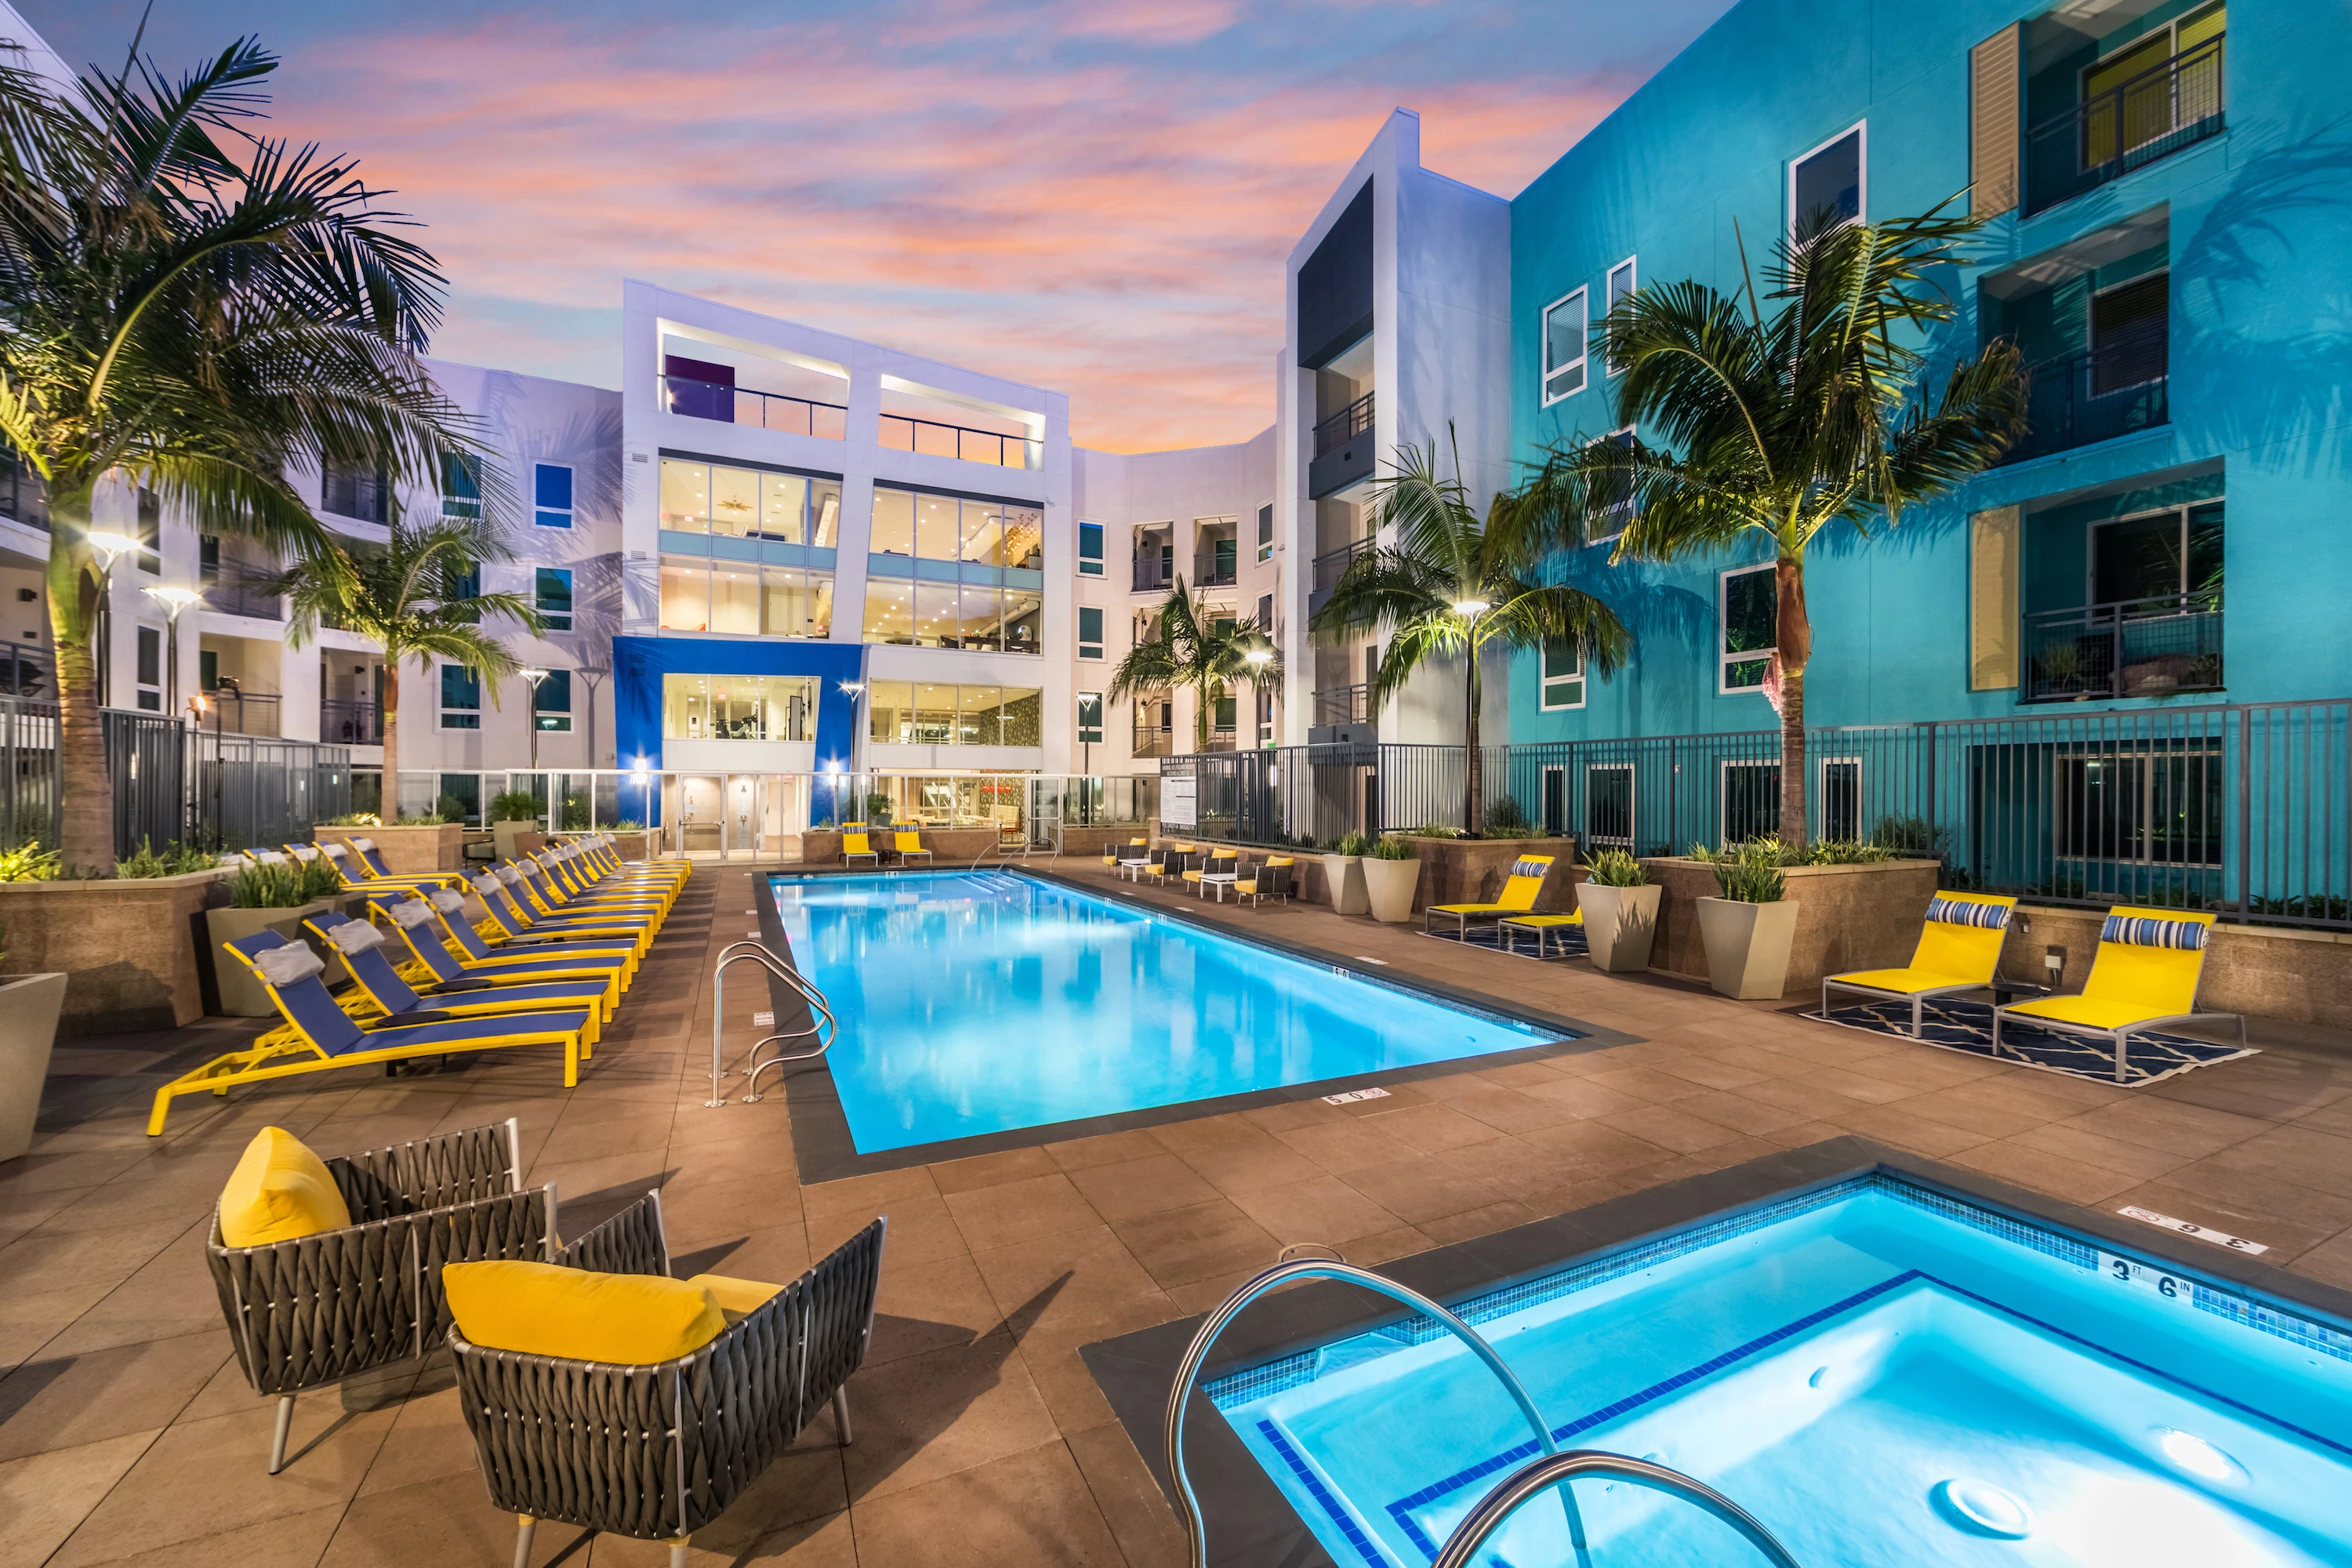 1241-15-pool-at-dusk-at-vela-on-ox-apartments-in-woodland-hills-ca.jpg